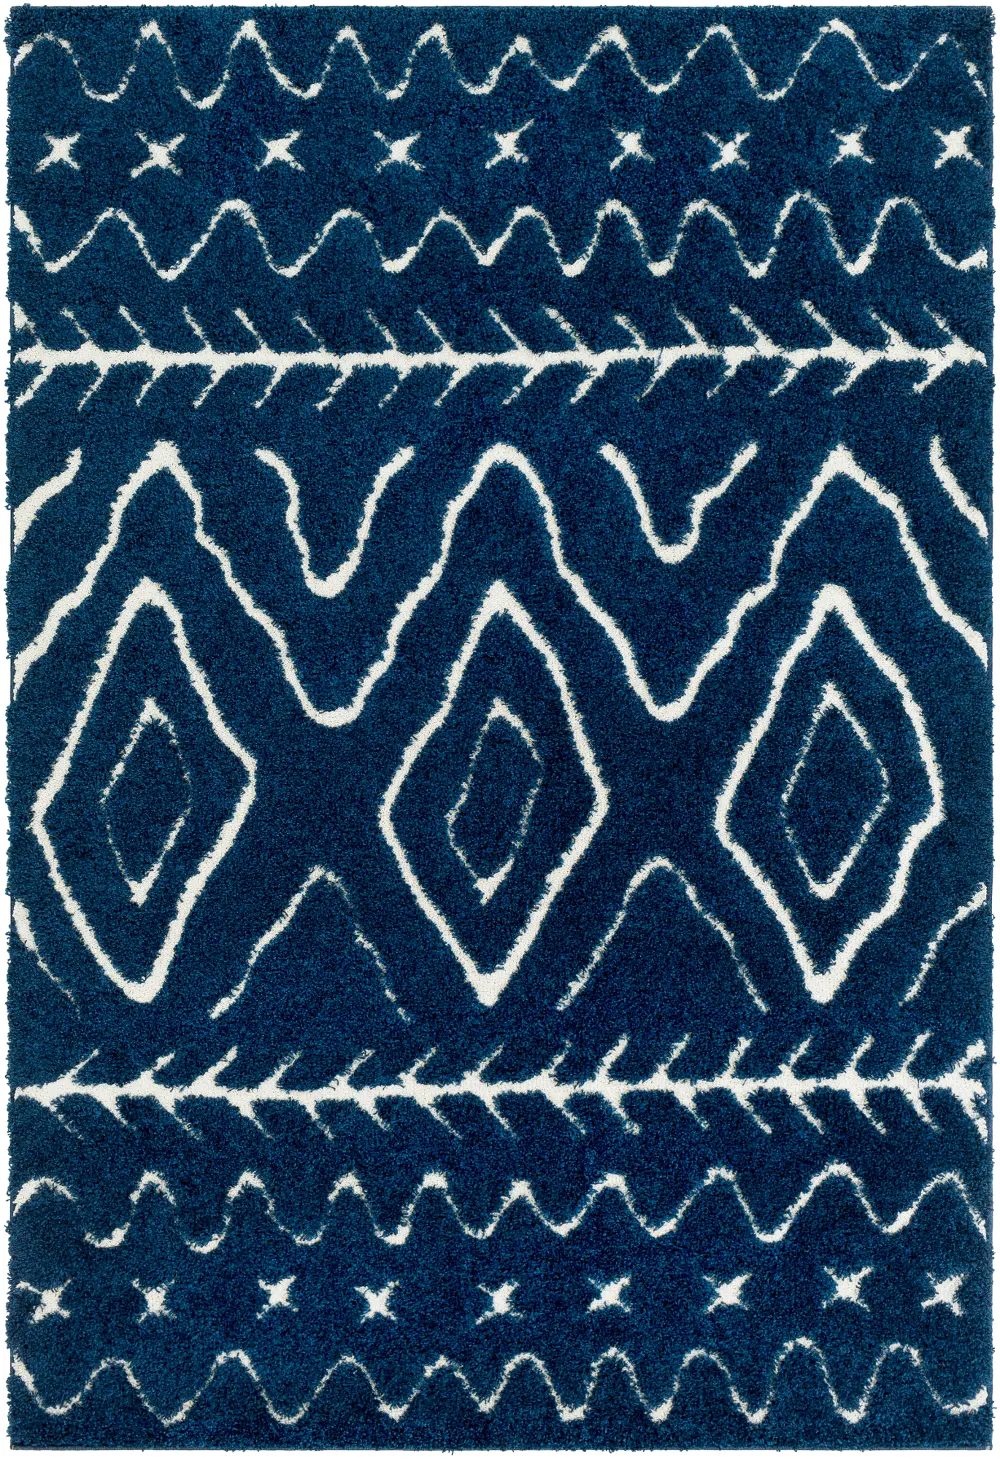 2 x 3 X-Small Navy Blue and Cream Area Rug - Cut and Loop-1